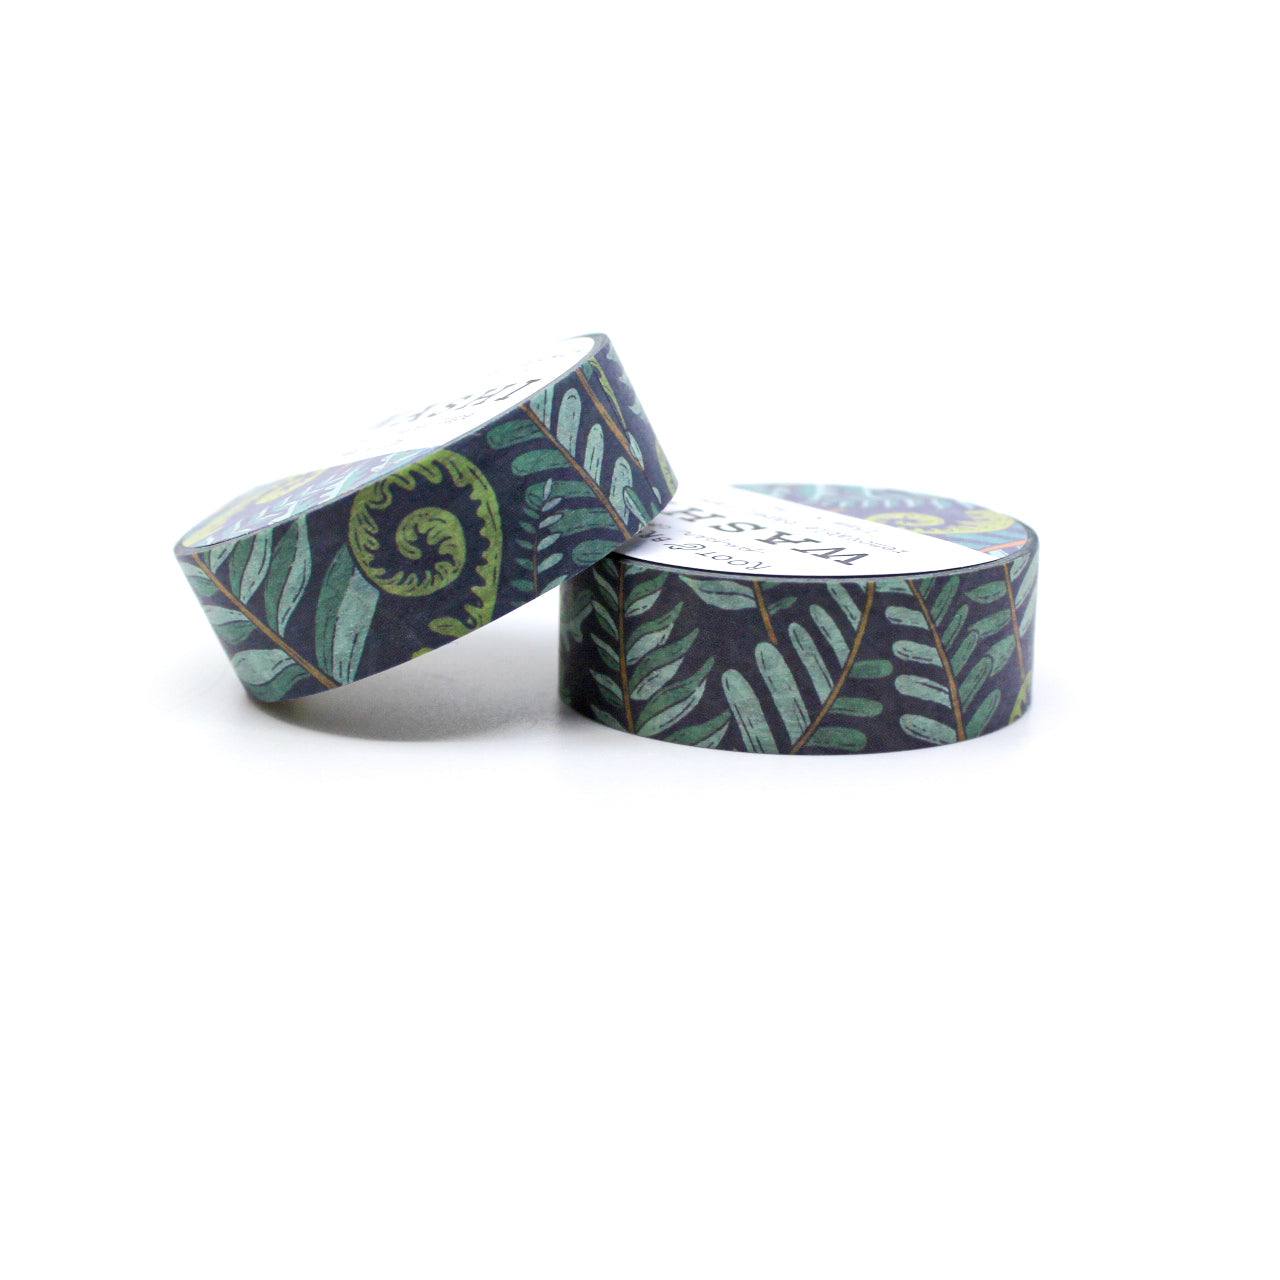 Forest Fern Washi Tape, featuring intricate fern designs, perfect for adding a touch of nature to your projects and crafts. This tape is sold at BBB Supplies Craft Shop and designed by Root & Branch Paper Co.